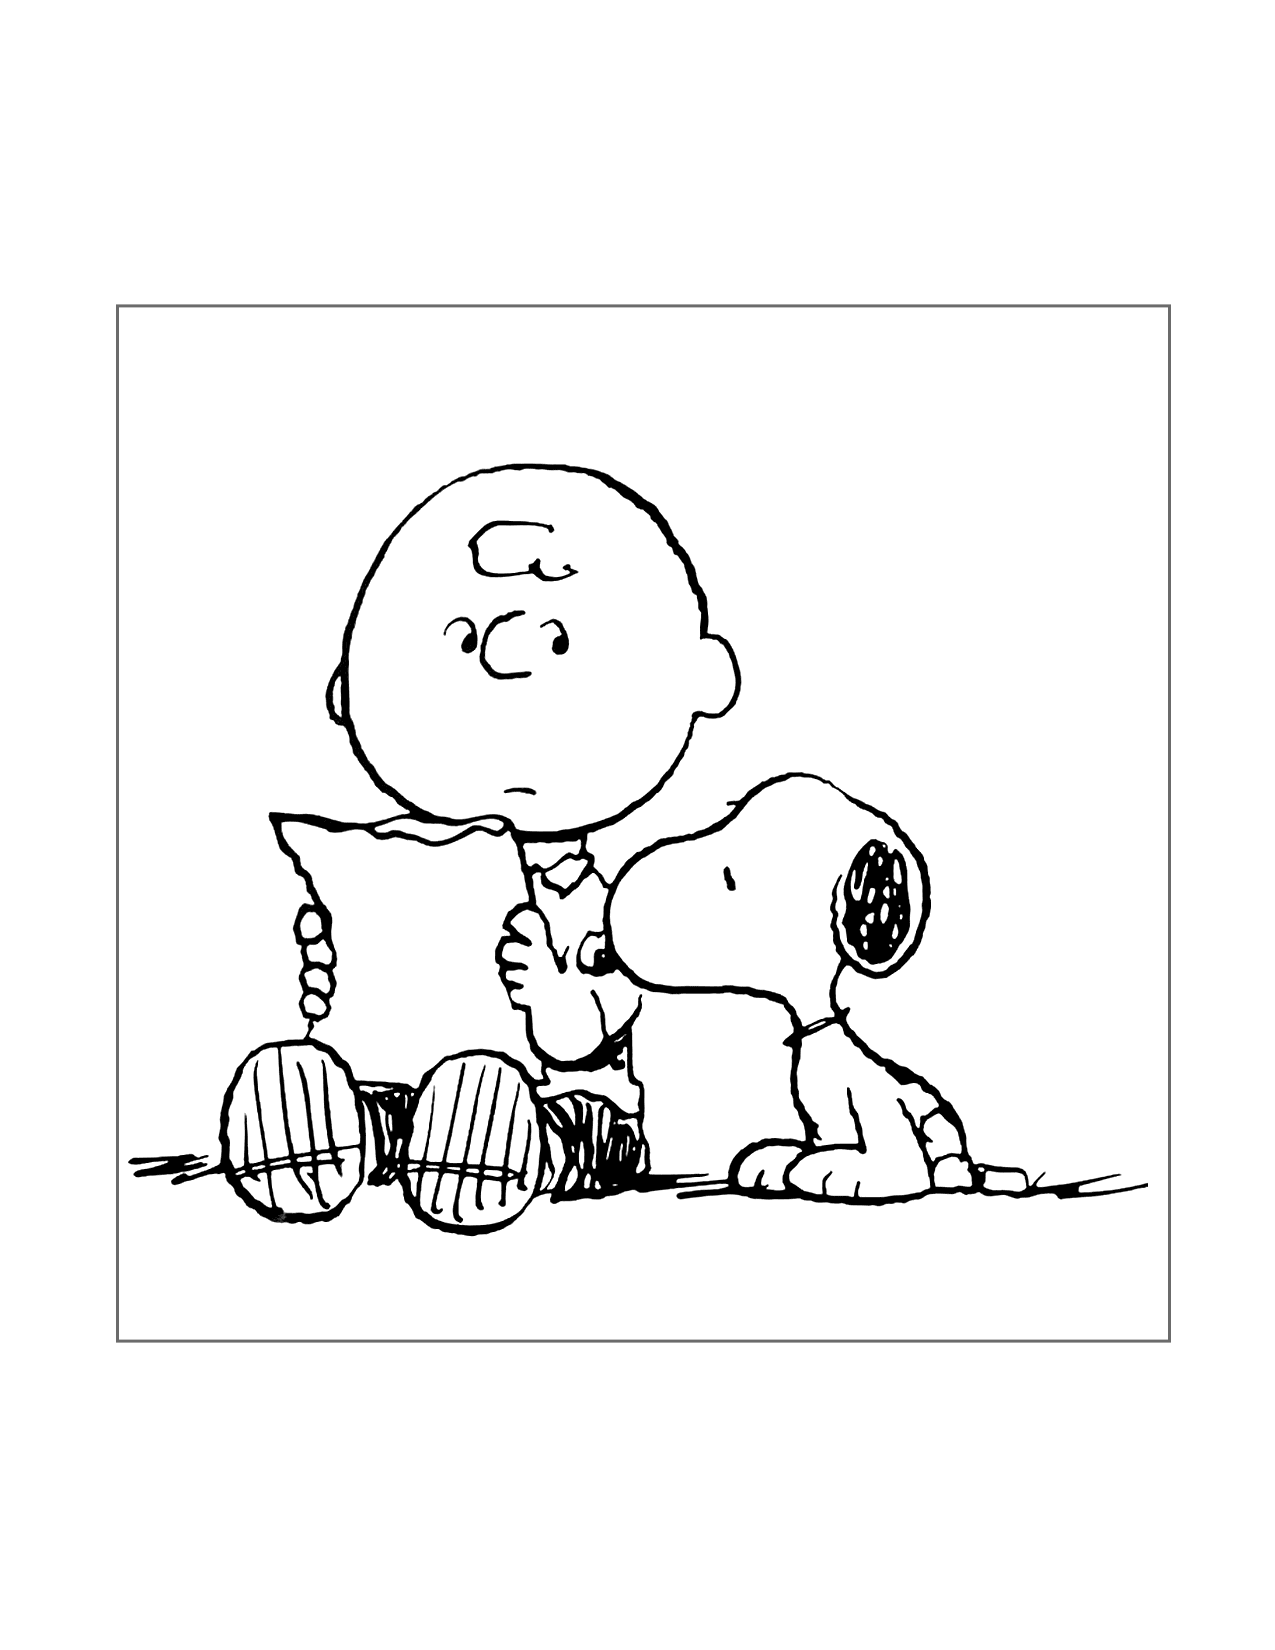 Charlie Brown And Snoopy Reading Coloring Page